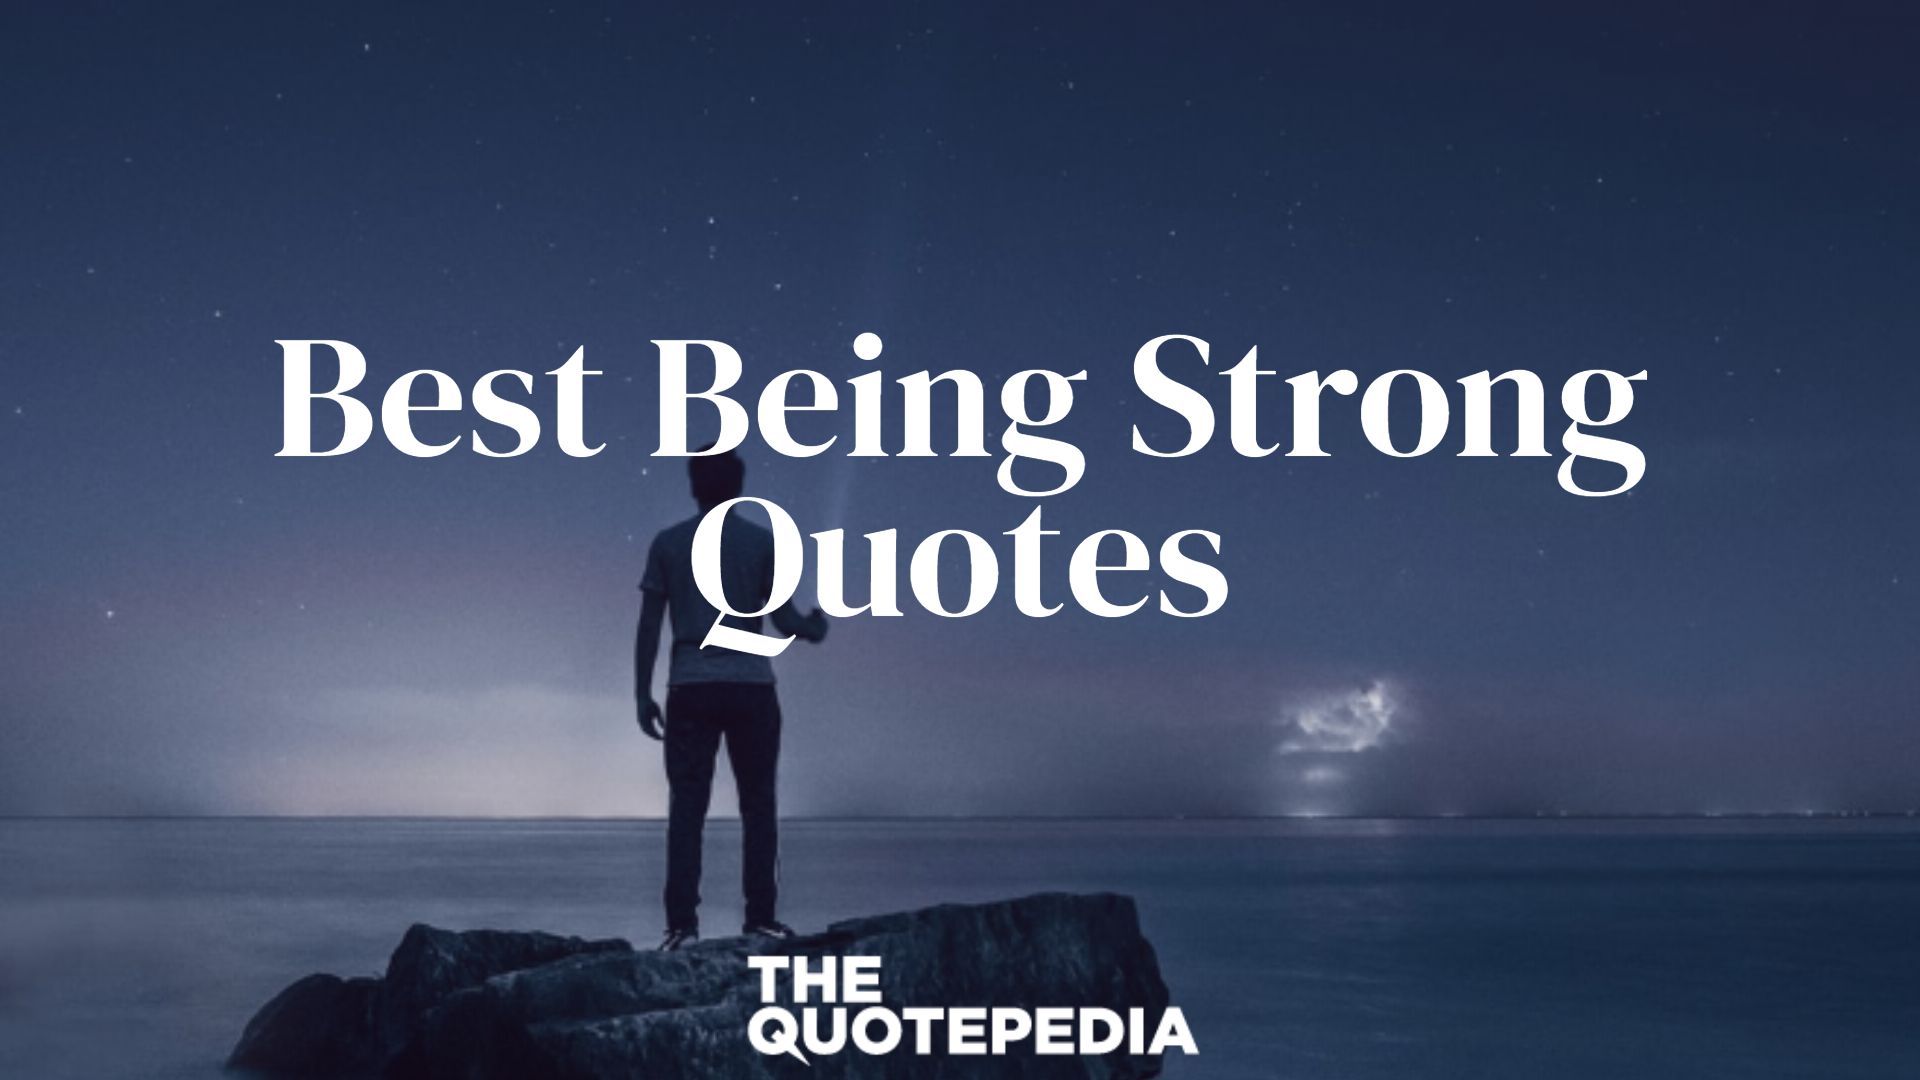 Best Being Strong Quotes